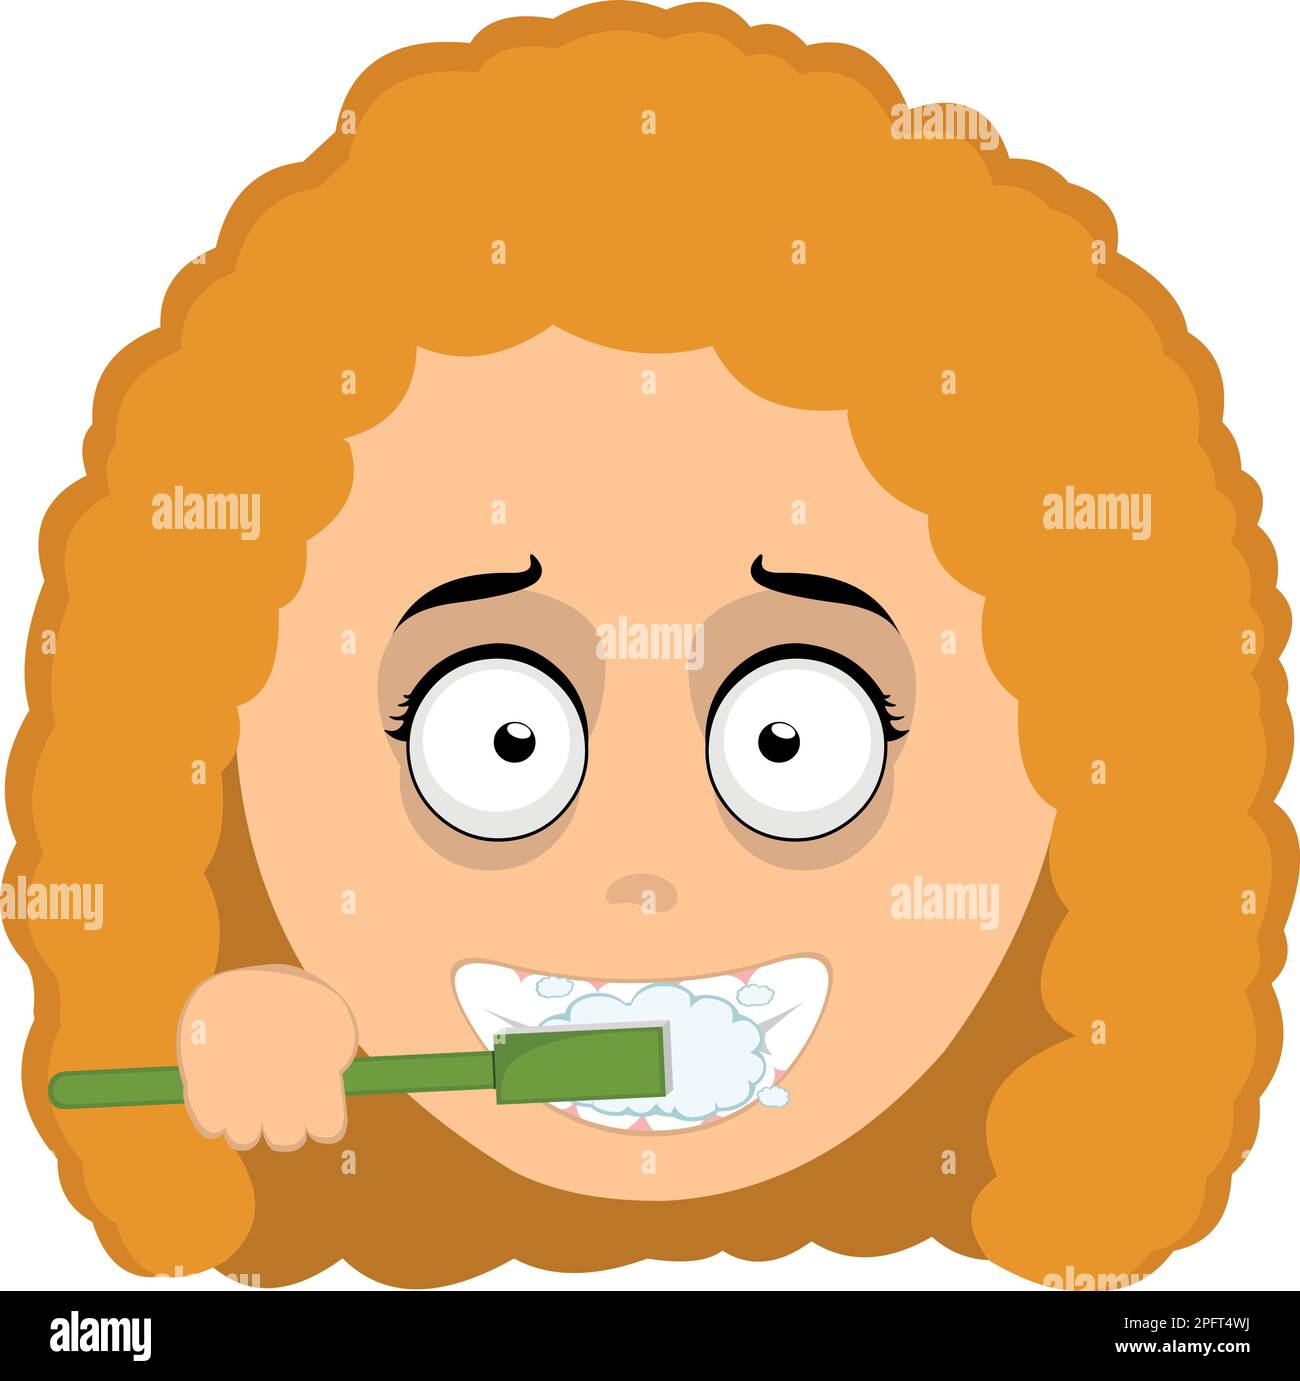 vector illustration face of a cartoon redhead woman brushing her teeth with a toothbrush Stock Vector